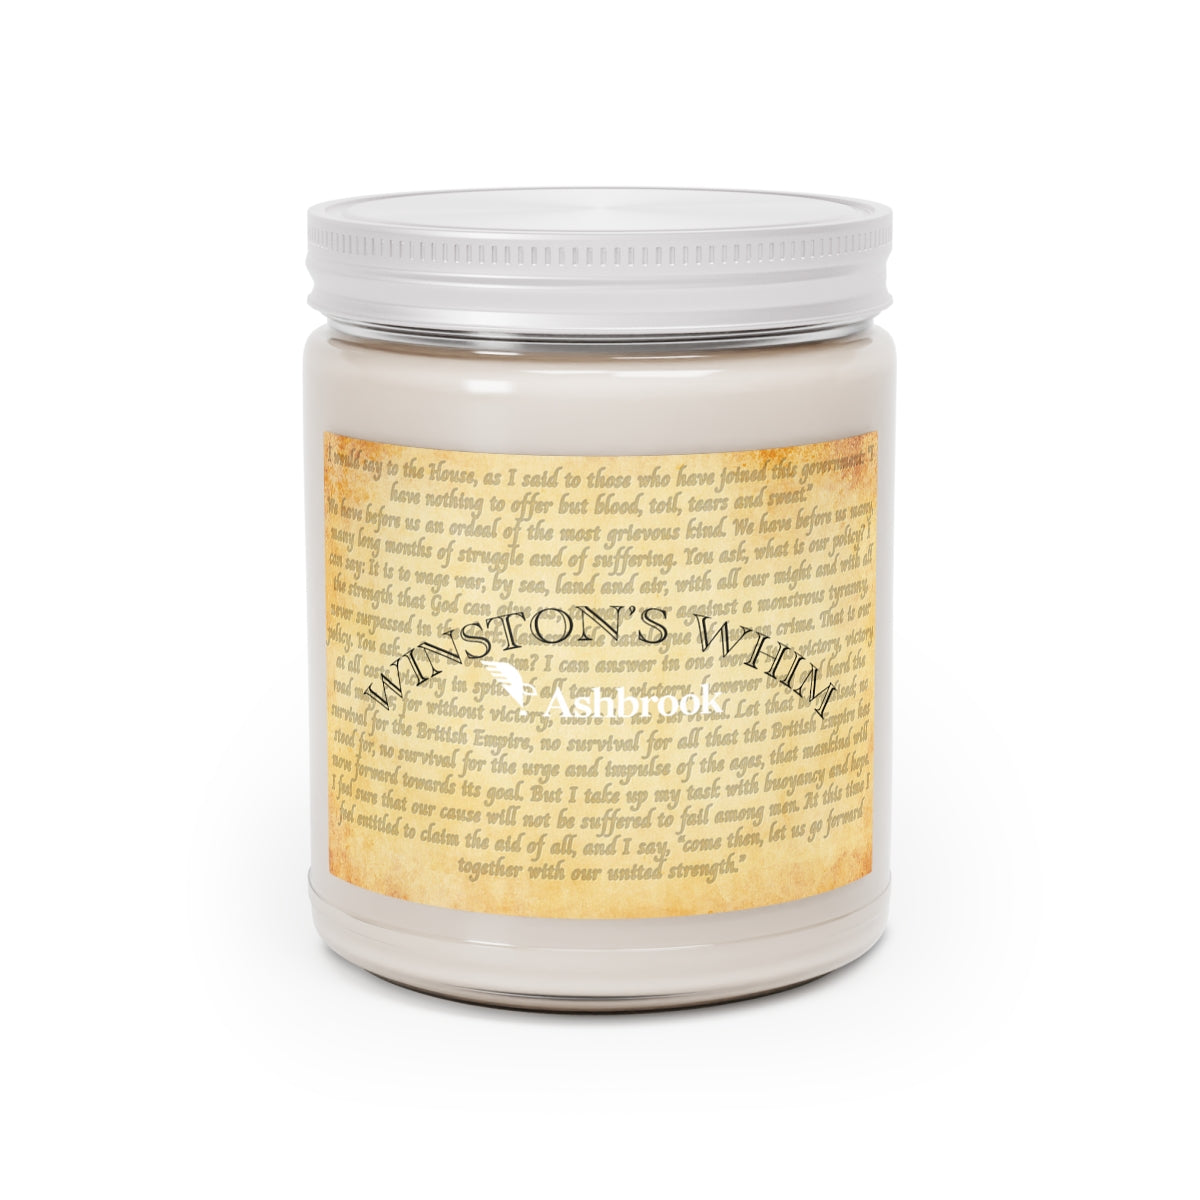 Winston's Whim Scented Candle, 9oz